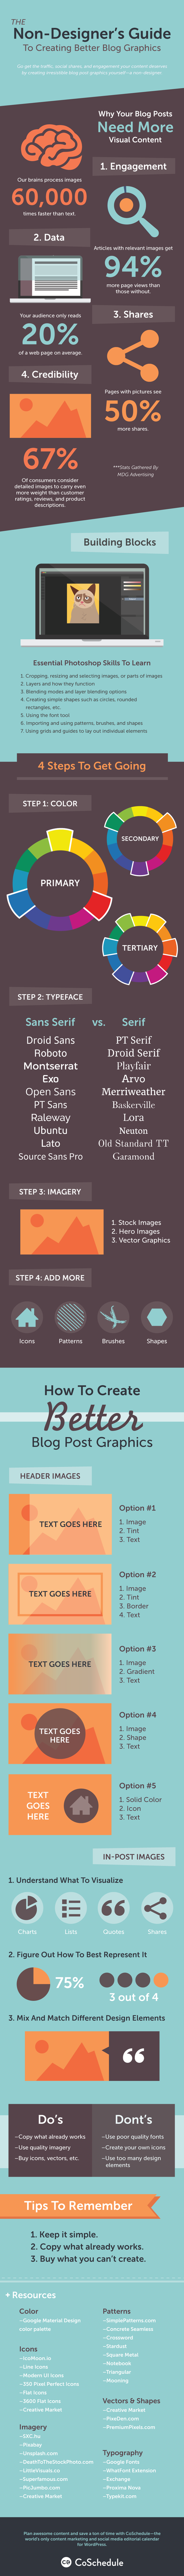 non-designers-guide-to-creating-better-blog-graphics-infographic